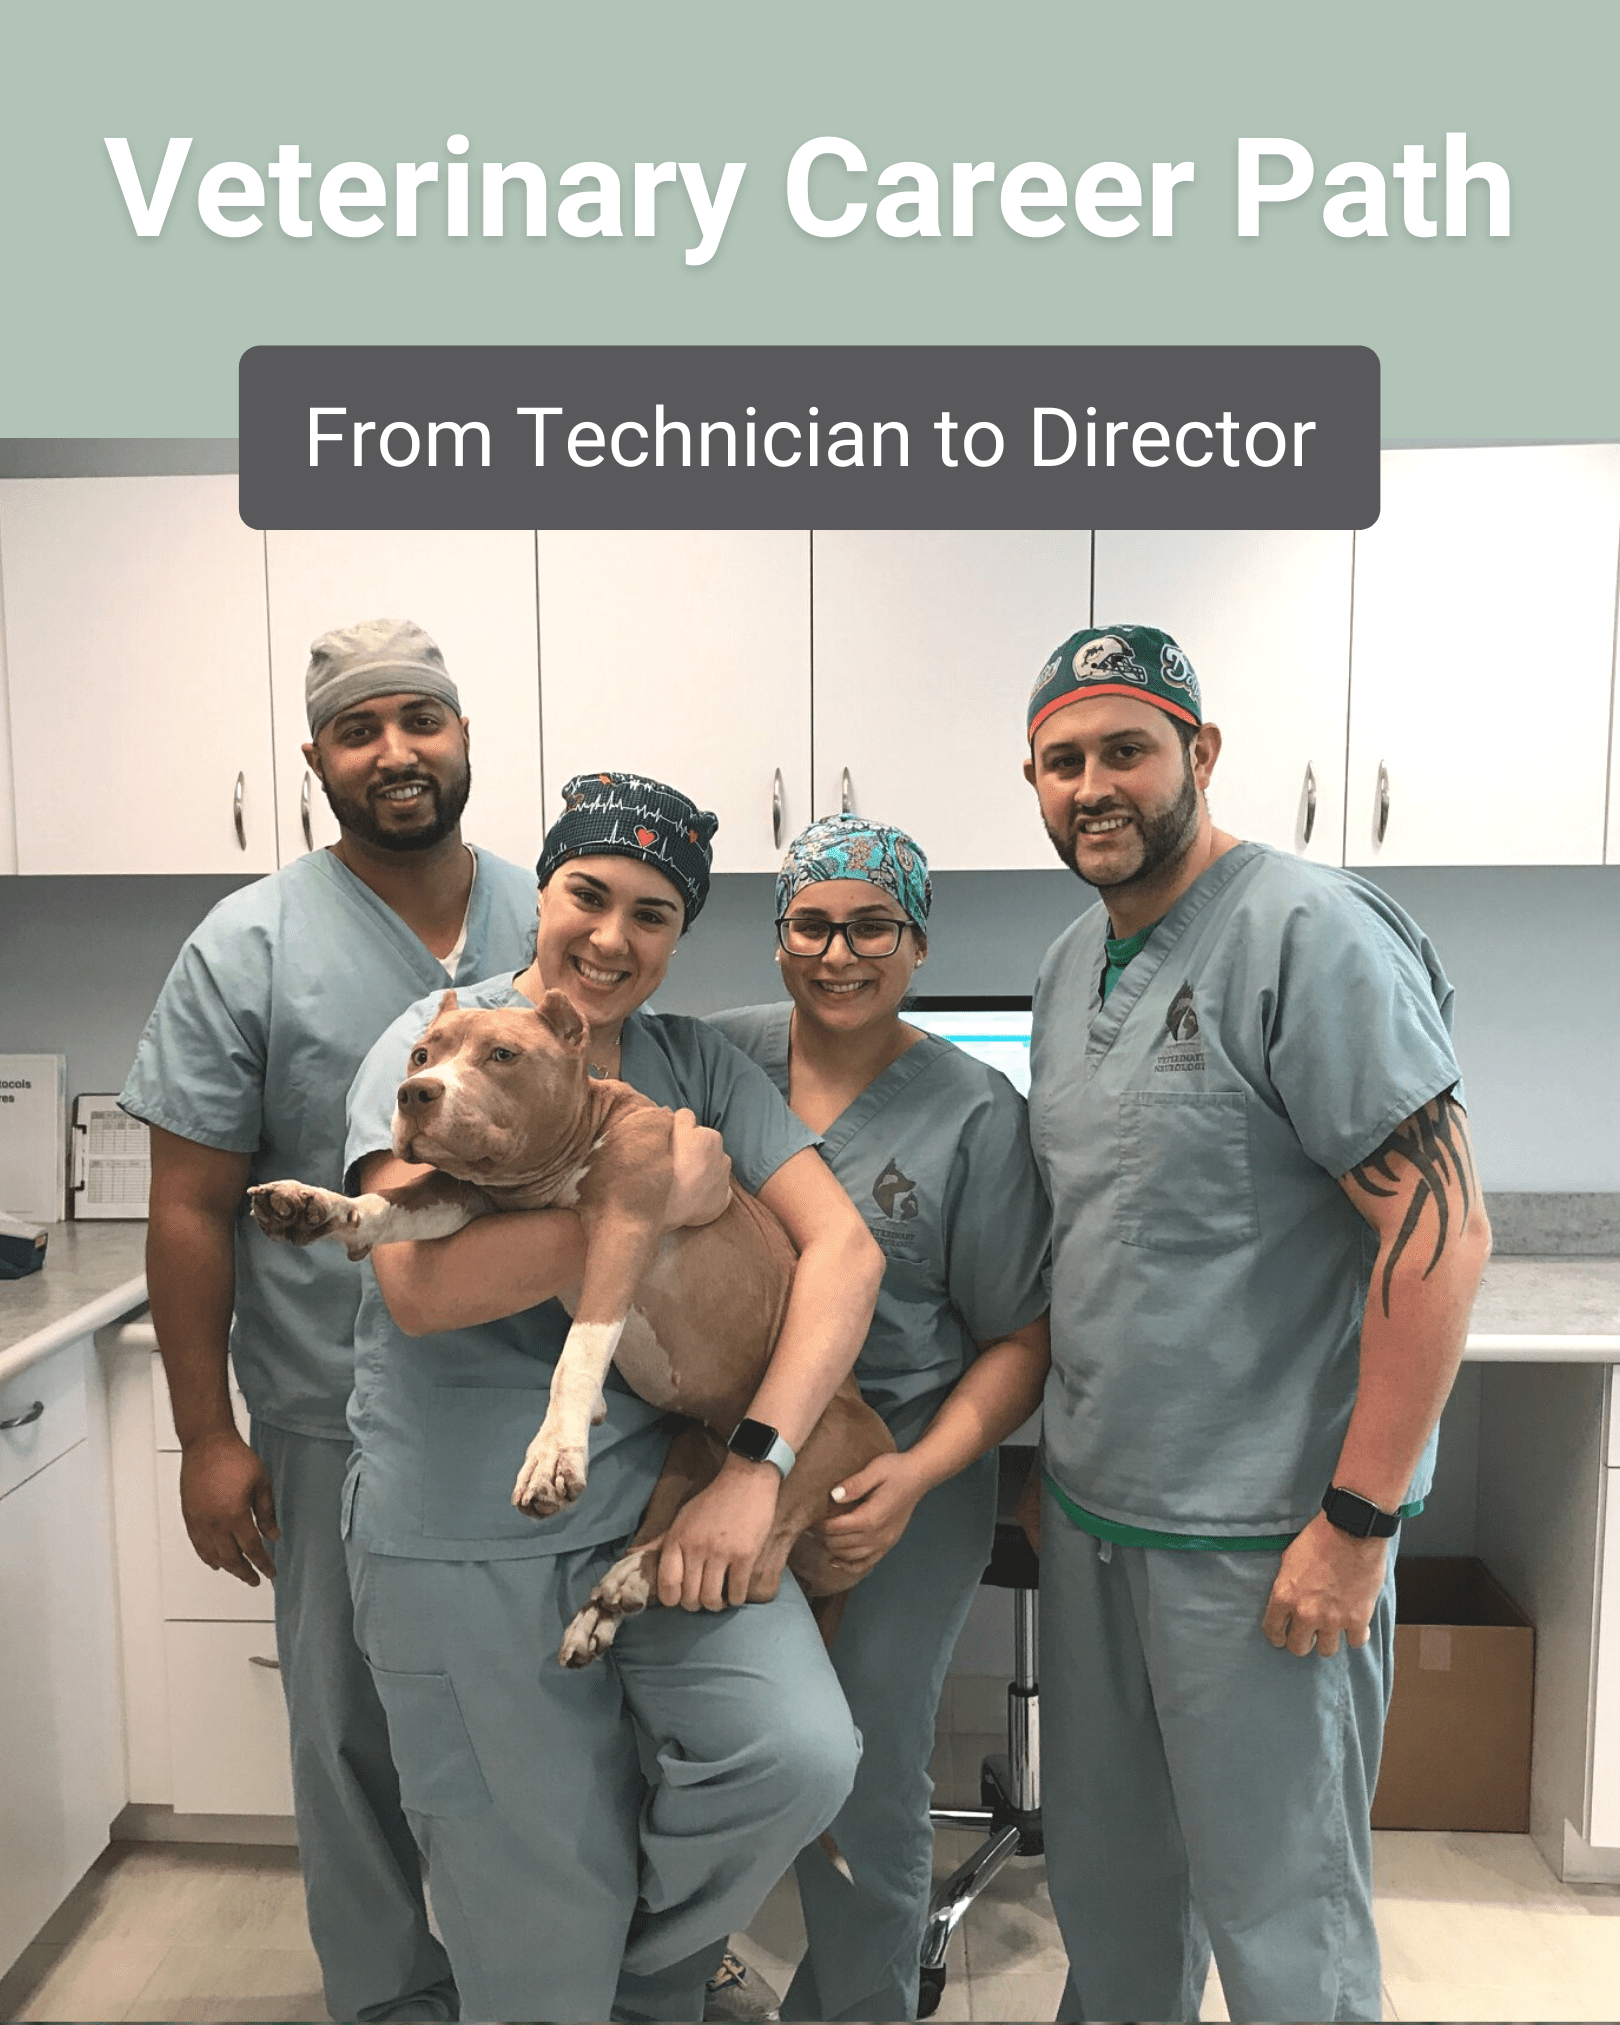 From Vet Tech to Director: A Veterinary Career Path